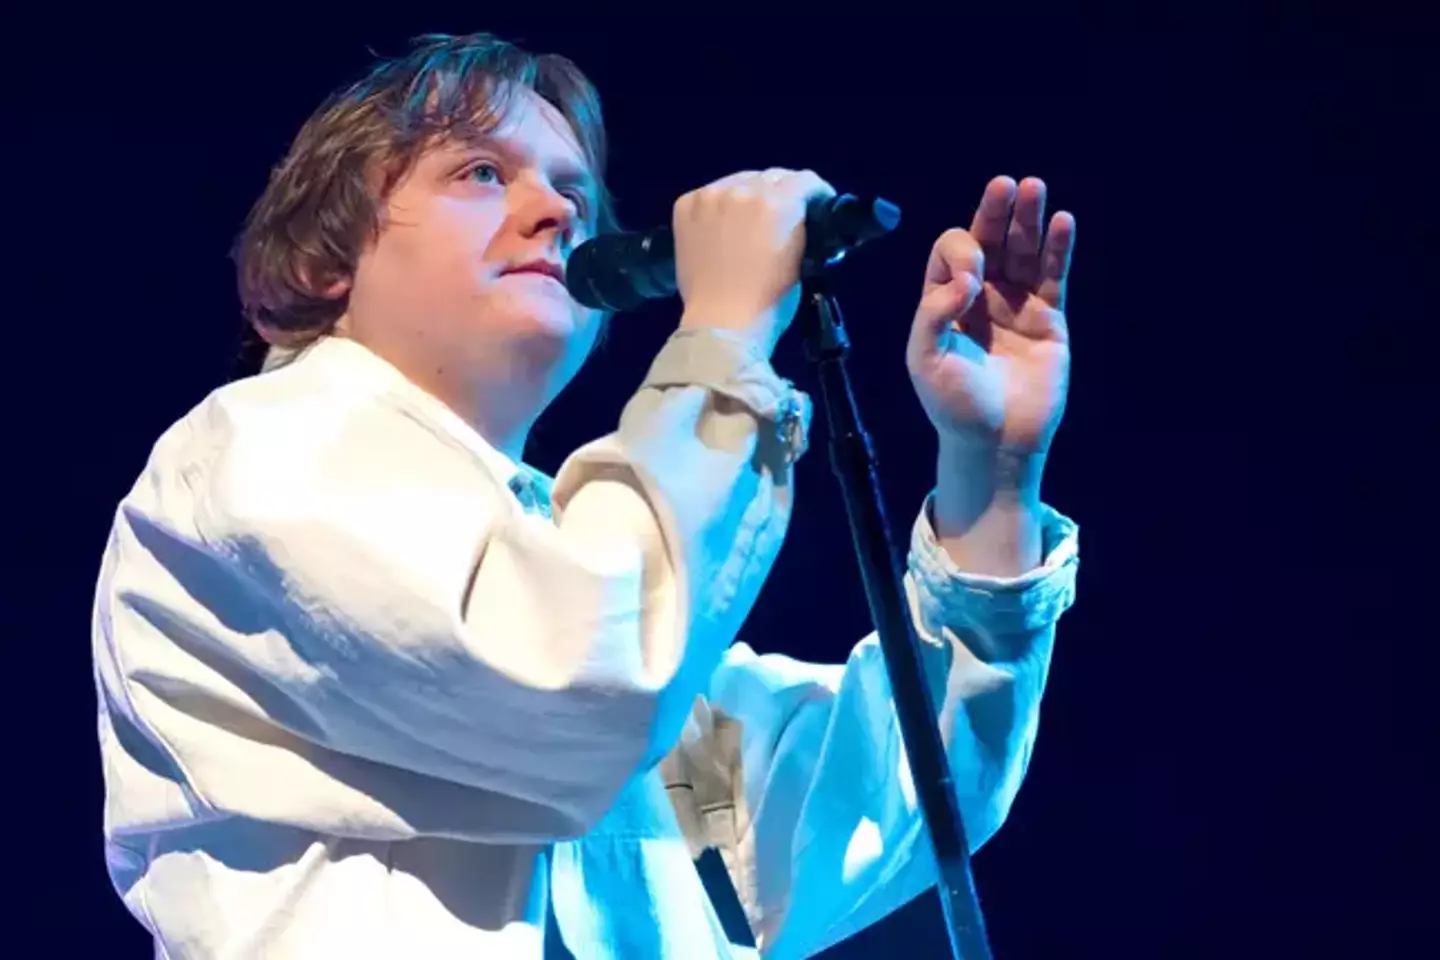 Lewis Capaldi has said his girlfriend is a 'lovely lady' who makes him a 'happy chappy'.